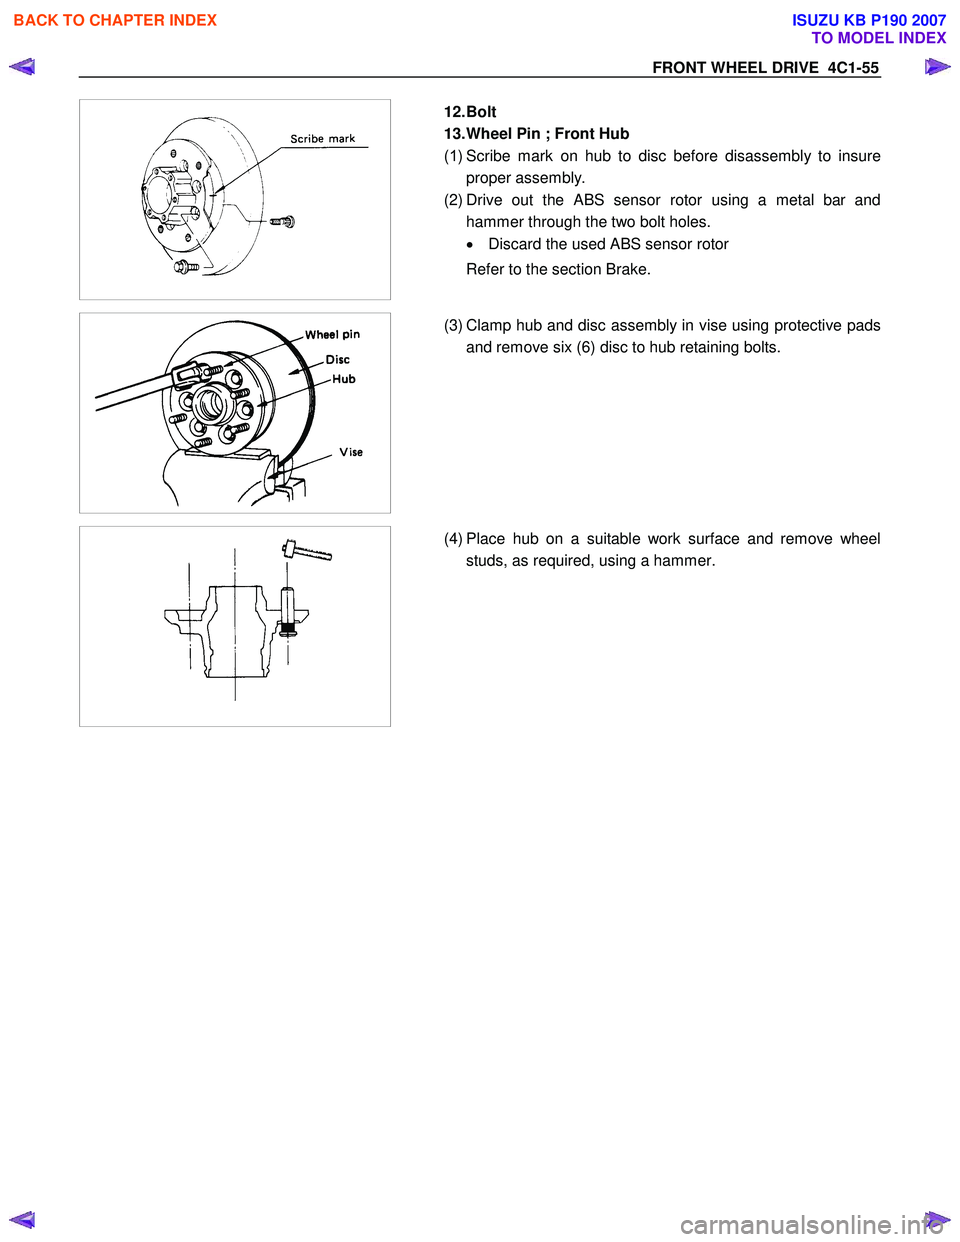 ISUZU KB P190 2007  Workshop Repair Manual FRONT WHEEL DRIVE  4C1-55 
 
 
 
  
  12. Bolt  
13. Wheel Pin ; Front Hub 
( 1 ) Scribe mark on hub to disc before disassembly to insure
proper assembly. 
(2) Drive out the ABS sensor rotor using a m